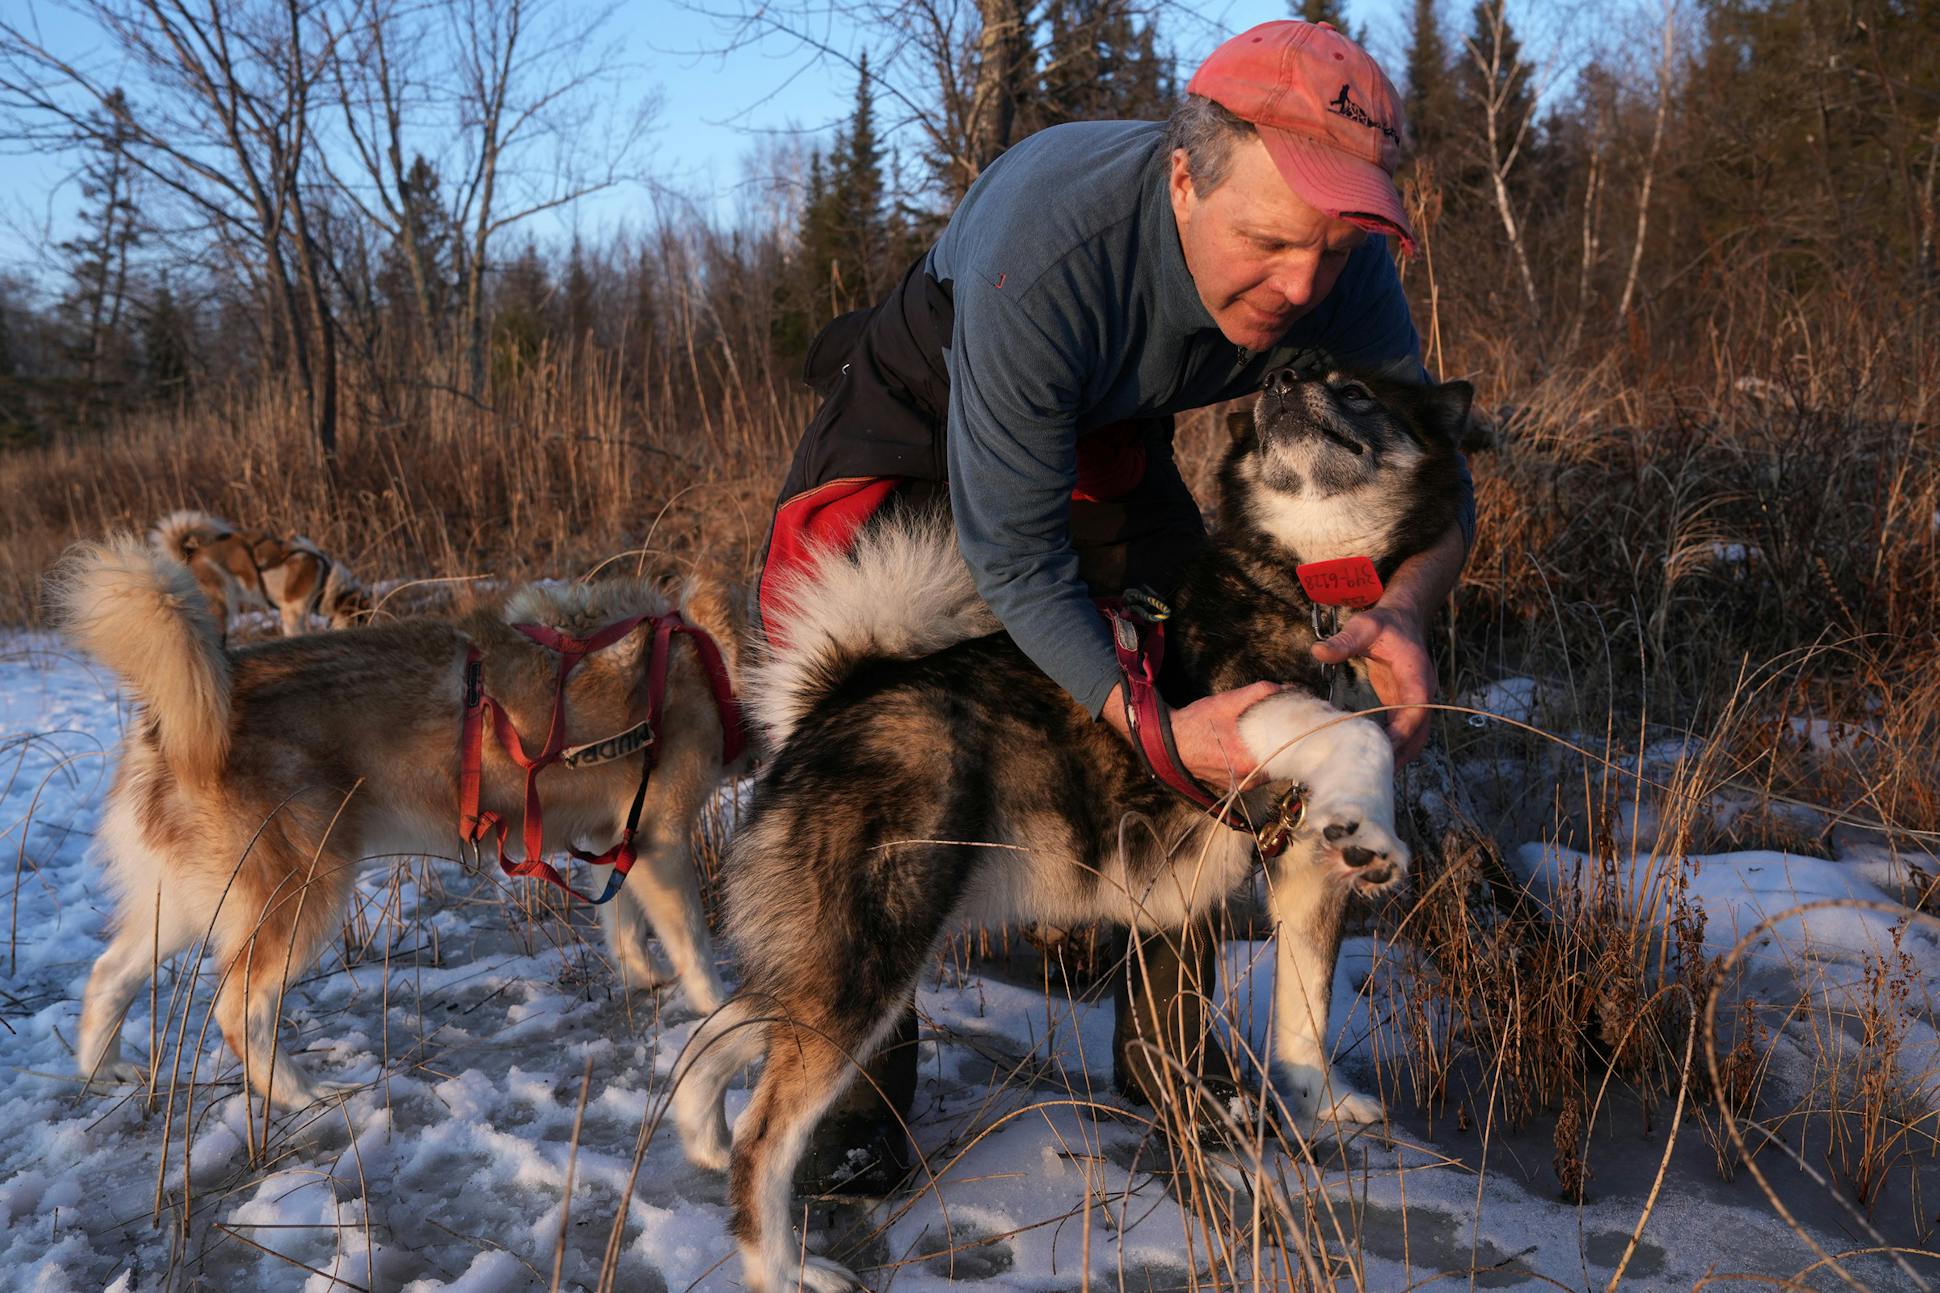 Paul Schurke, founder and guide at Wintergreen Dogsled Lodge, takes harnesses off the dog team at the end of the day in the BWCAW.